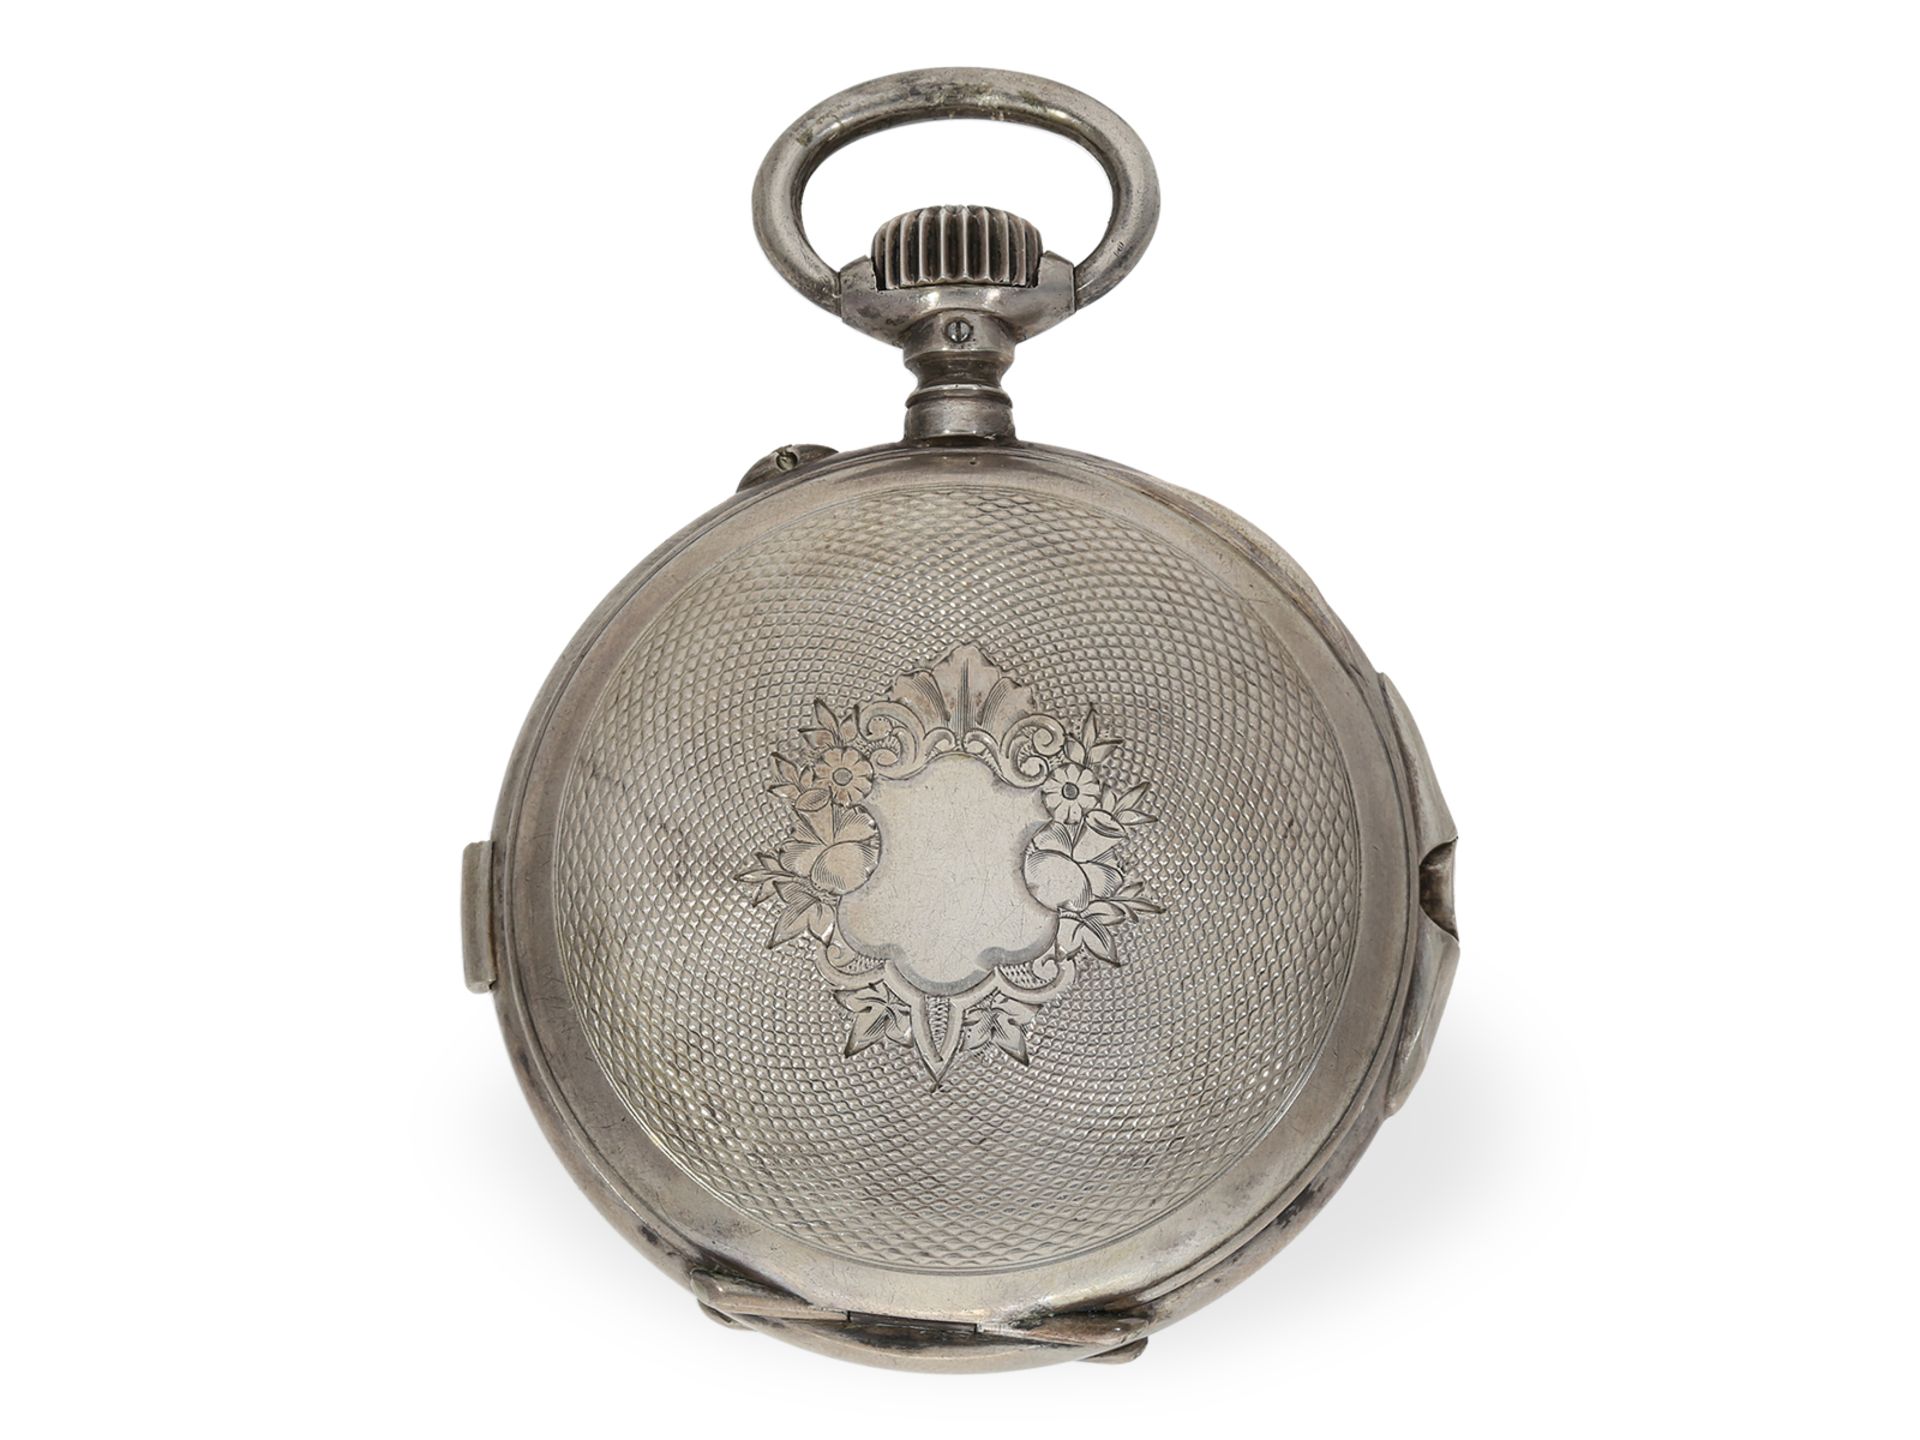 Pocket watch: technically interesting split-seconds chronograph, Bovet "Montre Universelle" ca. 1890 - Image 6 of 7